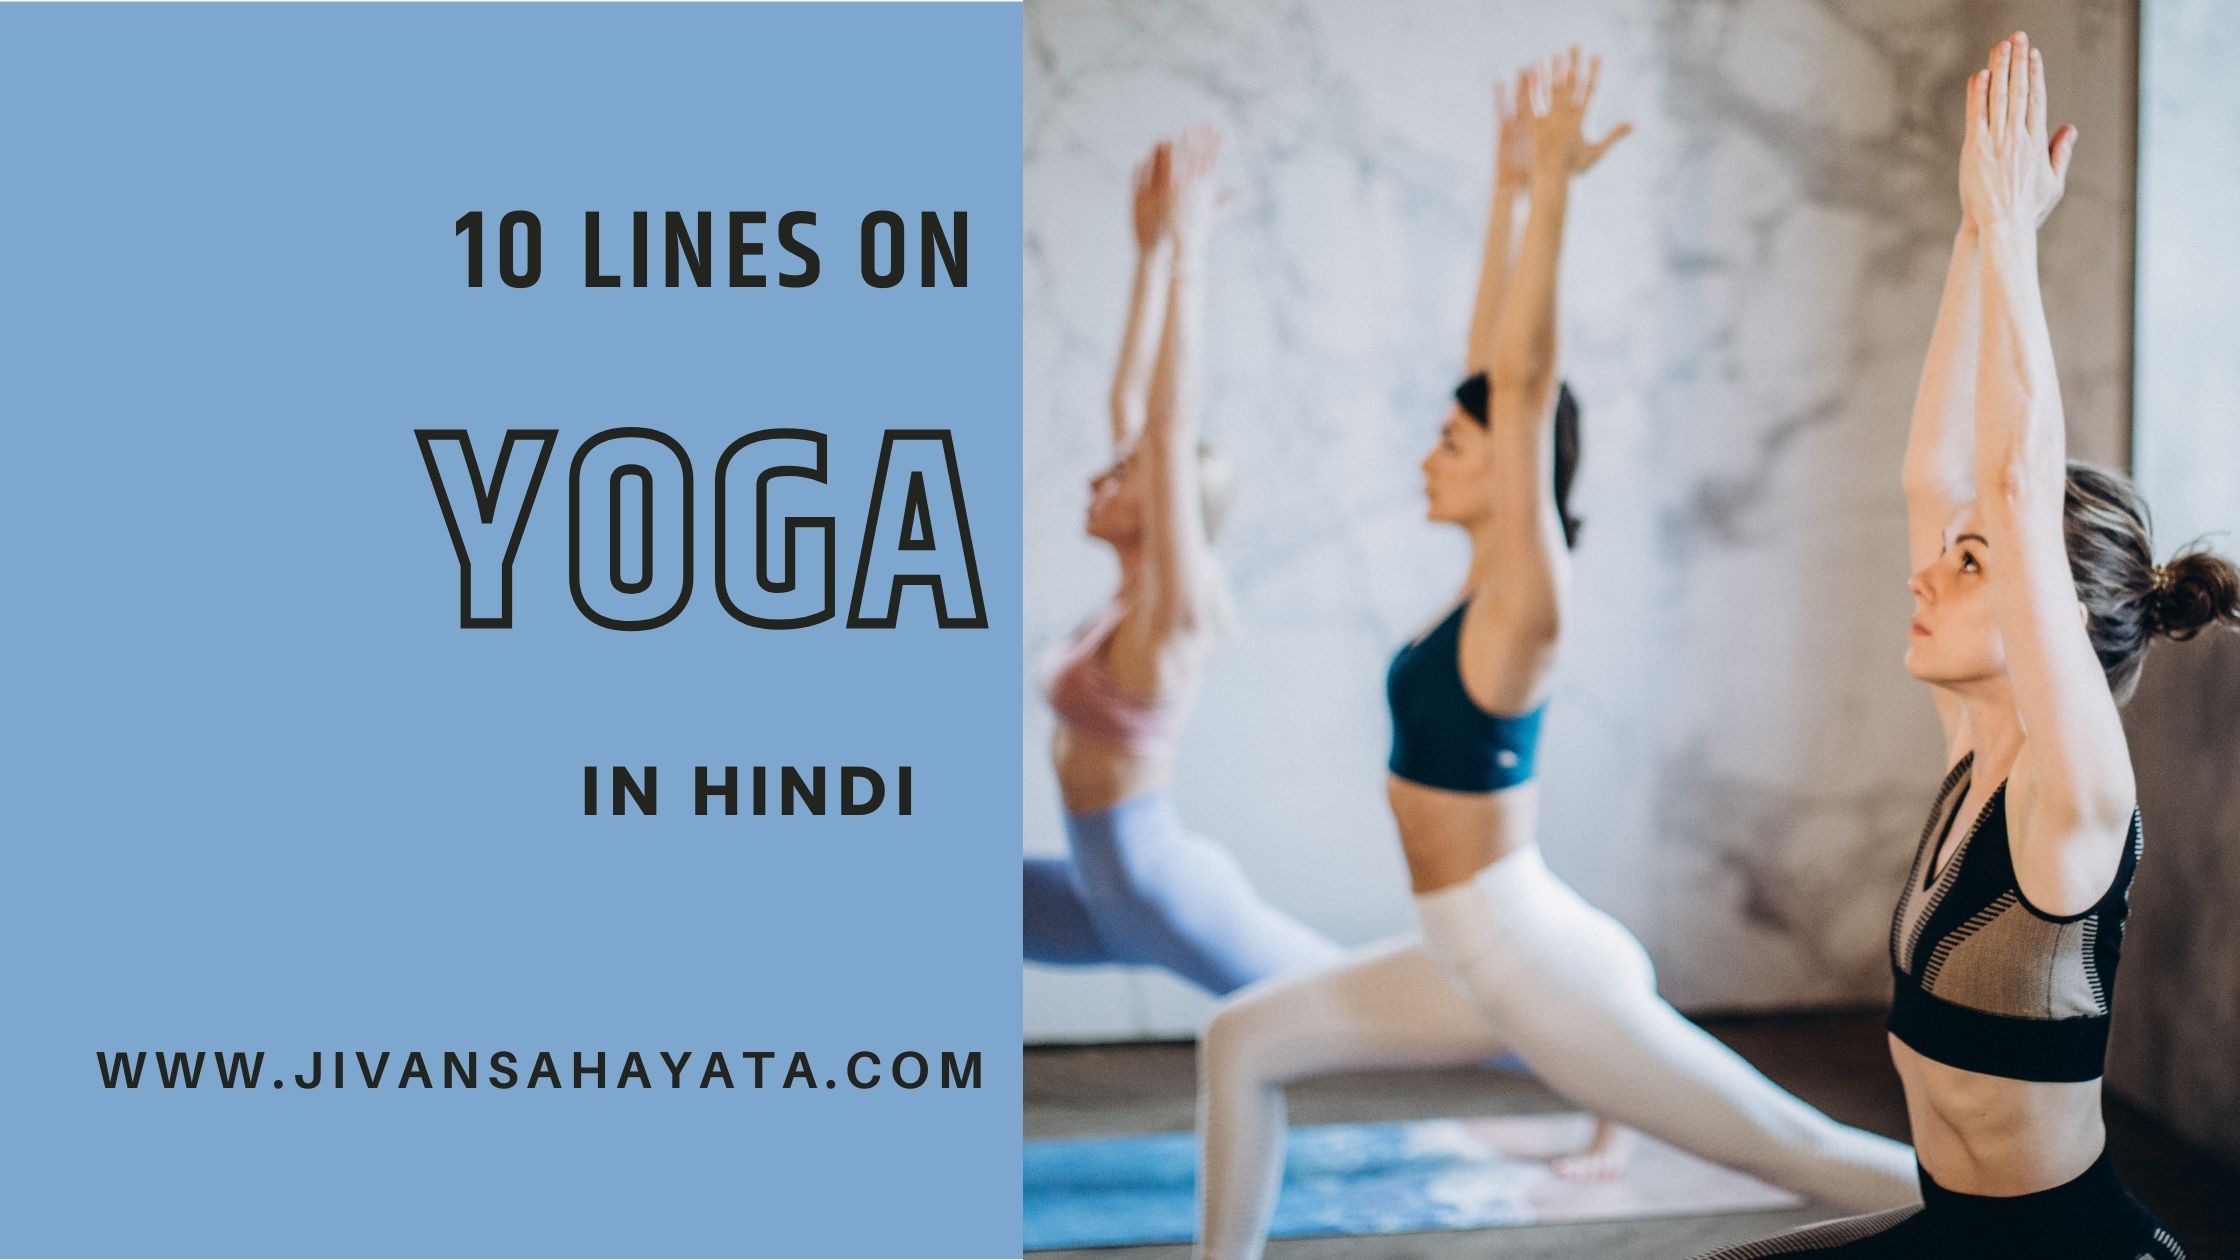 10 lines on Yoga in Hindi